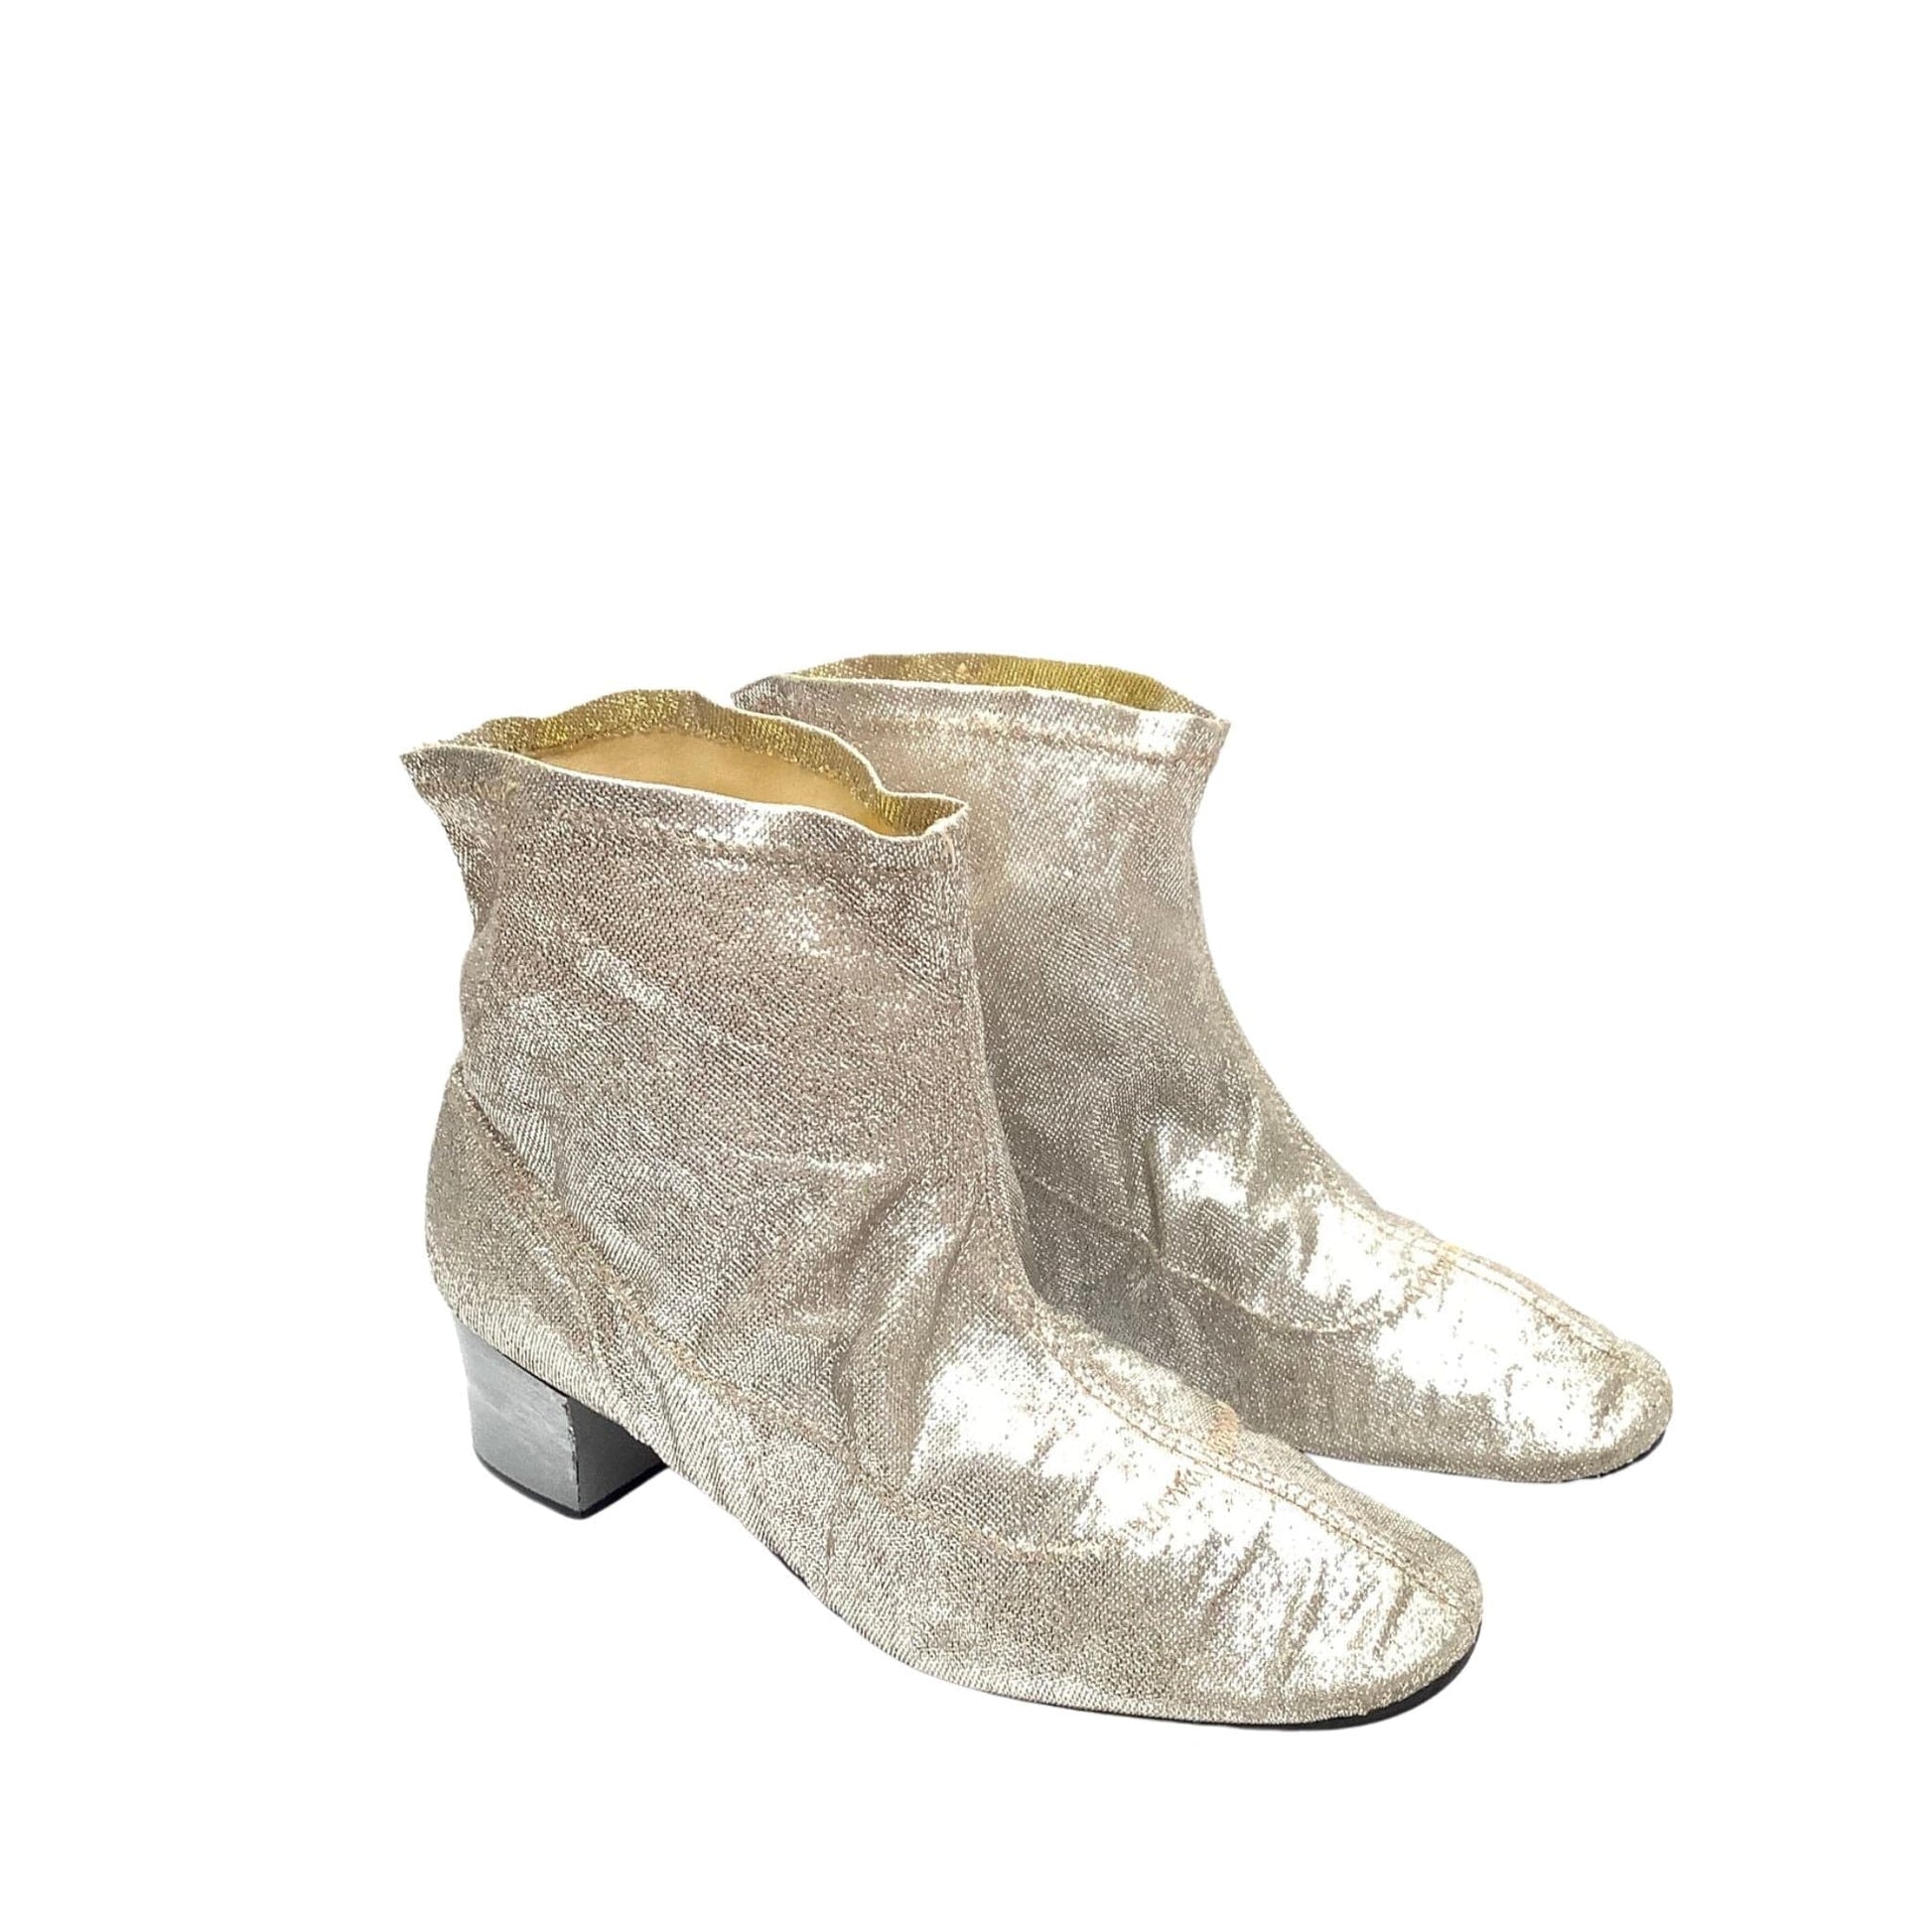 1960s Silver GoGo Booties 7 / Silver / Vintage 1960s